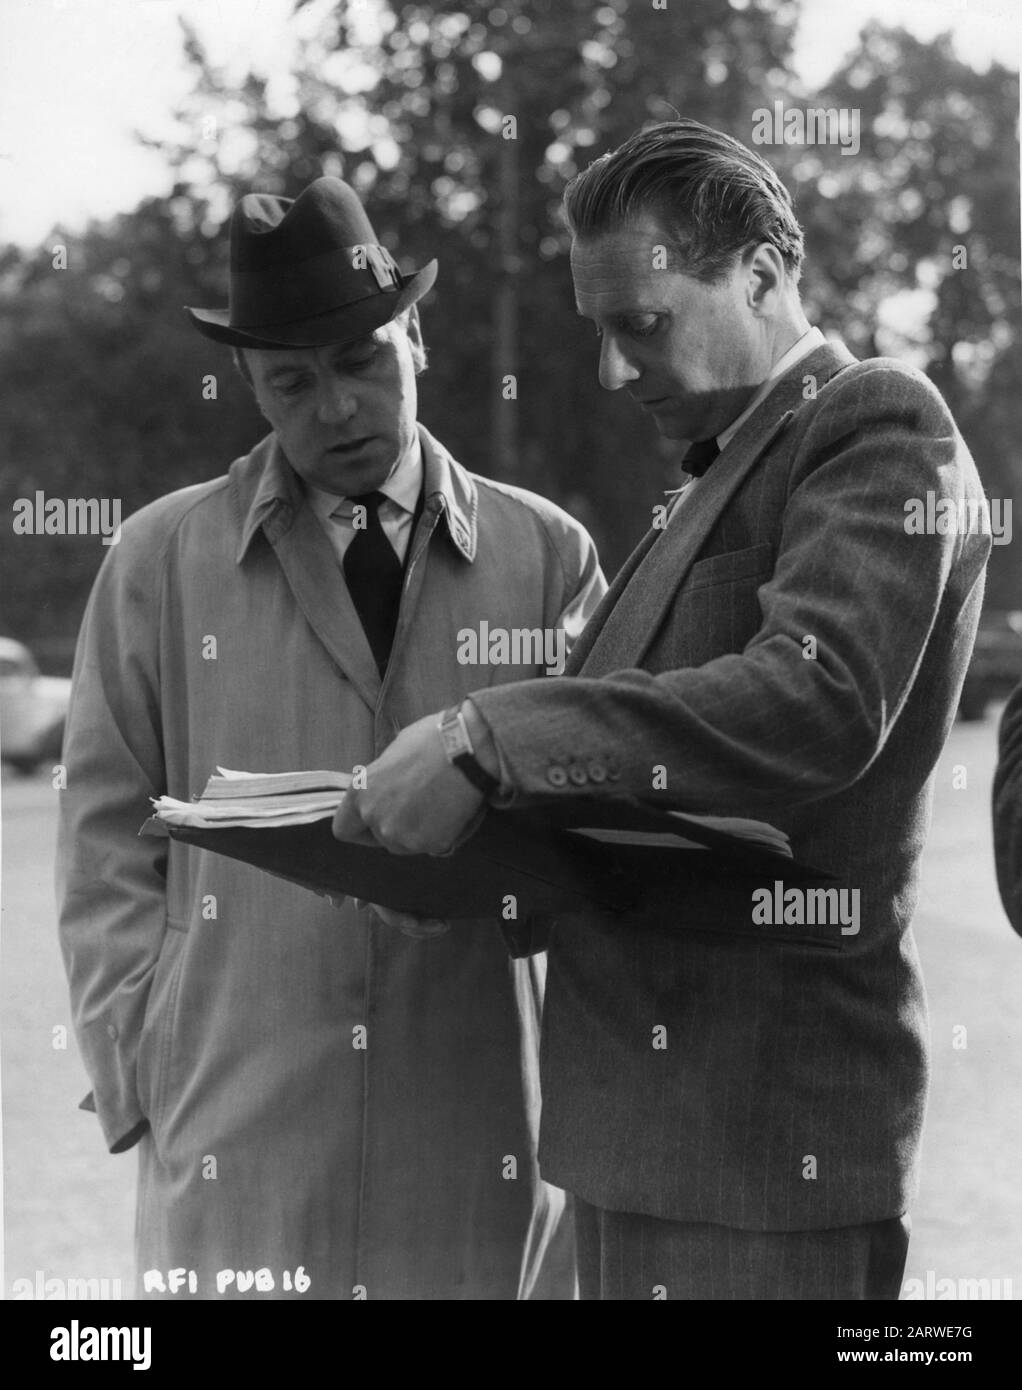 RALPH RICHARDSON and Director CAROL REED on set location candid in Belgrave Square London during filming of THE FALLEN IDOL 1948 short story and screenplay GRAHAM GREENE executive producer ALEXANDER KORDA London Film Productions / British Lion Film Corporation Stock Photo